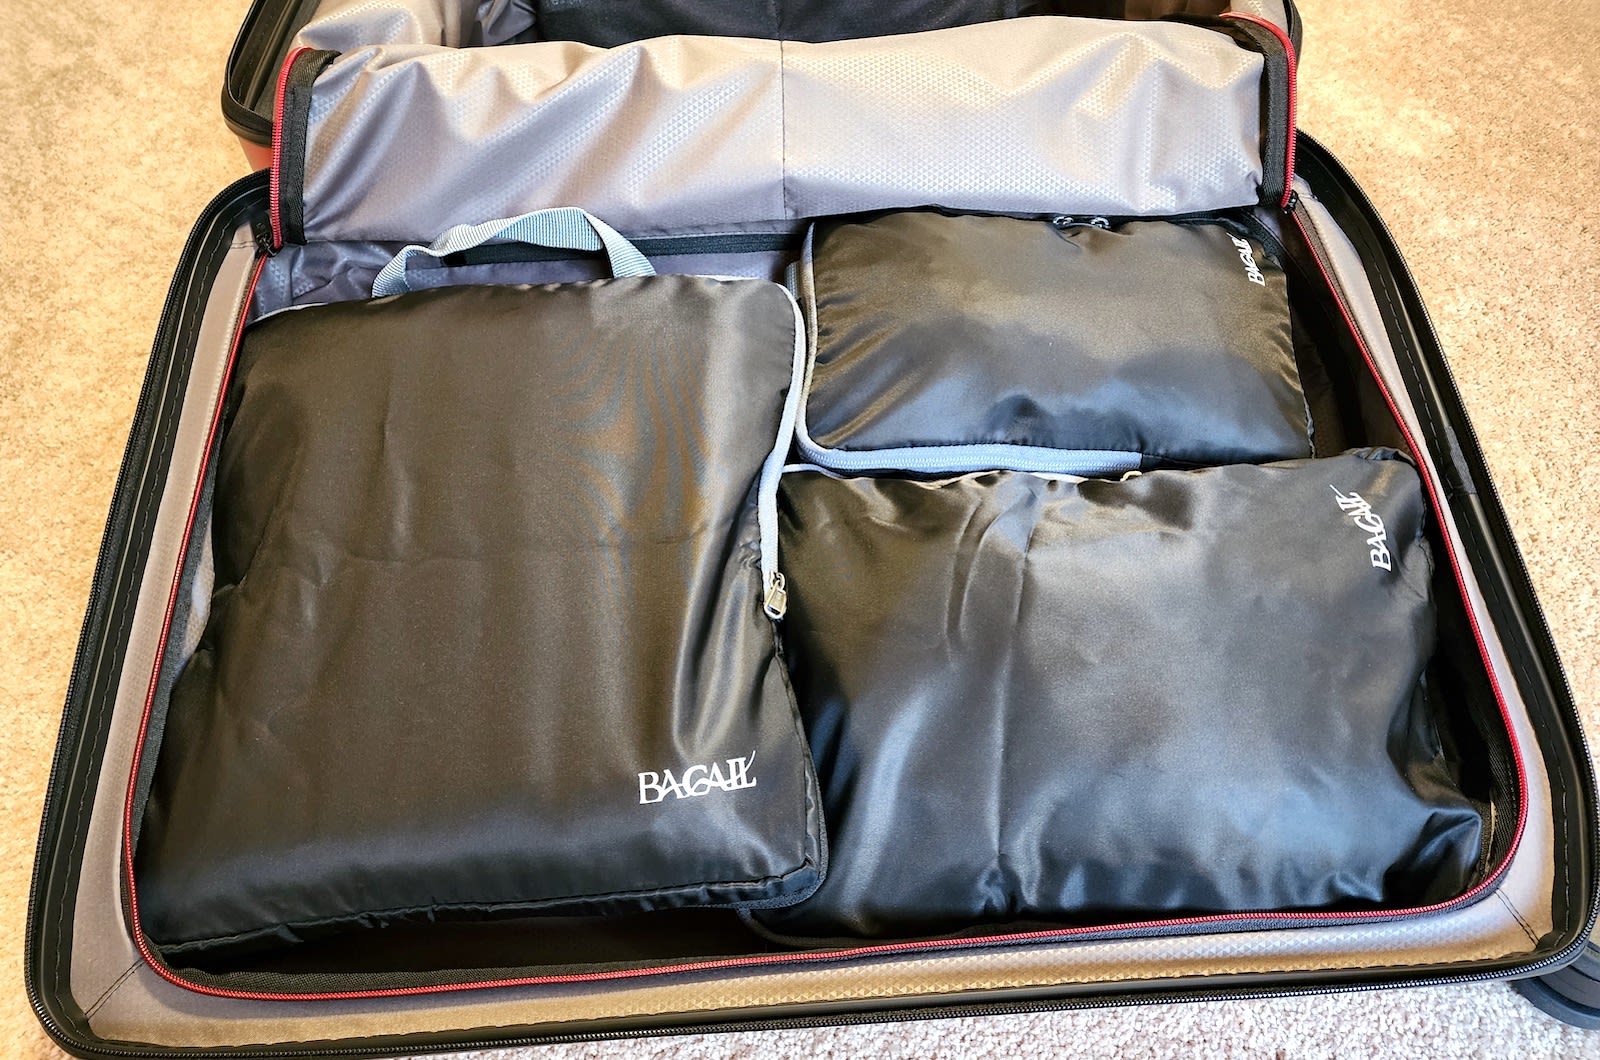 BAGAIL Compression Packing Cubes and Toiletry Bag (Review)